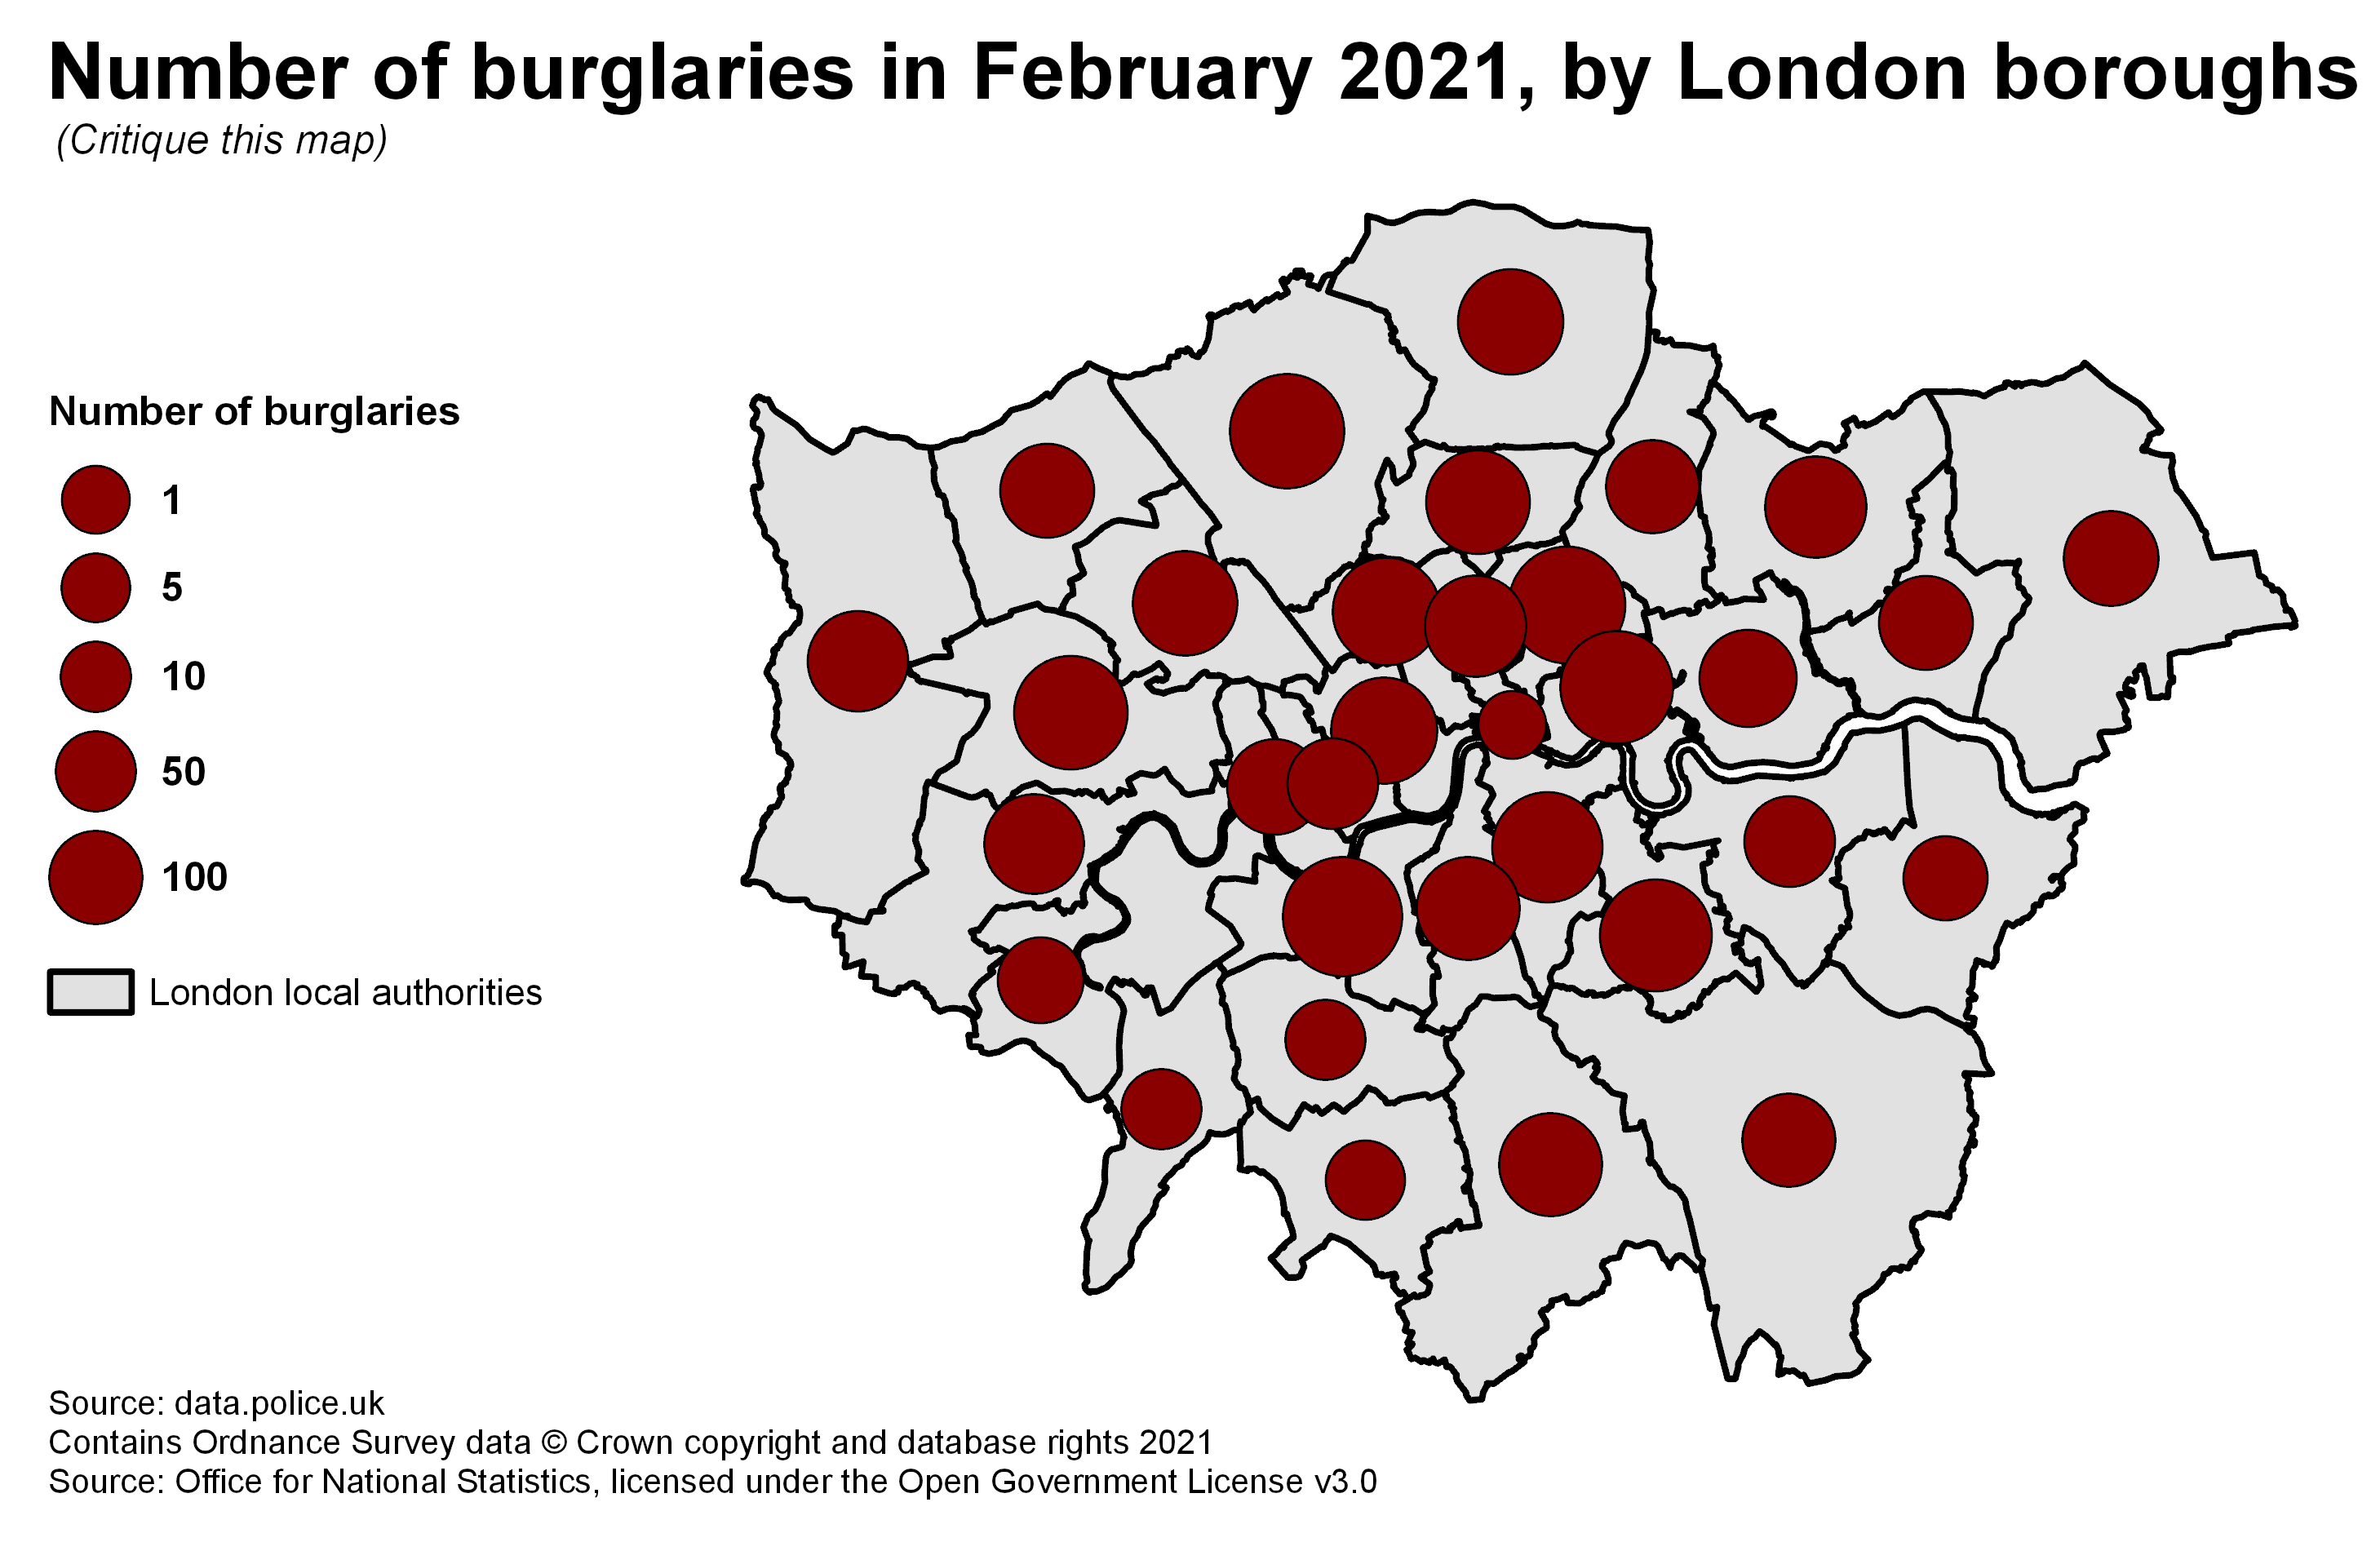 A bad version of a map showing burglaries in London.